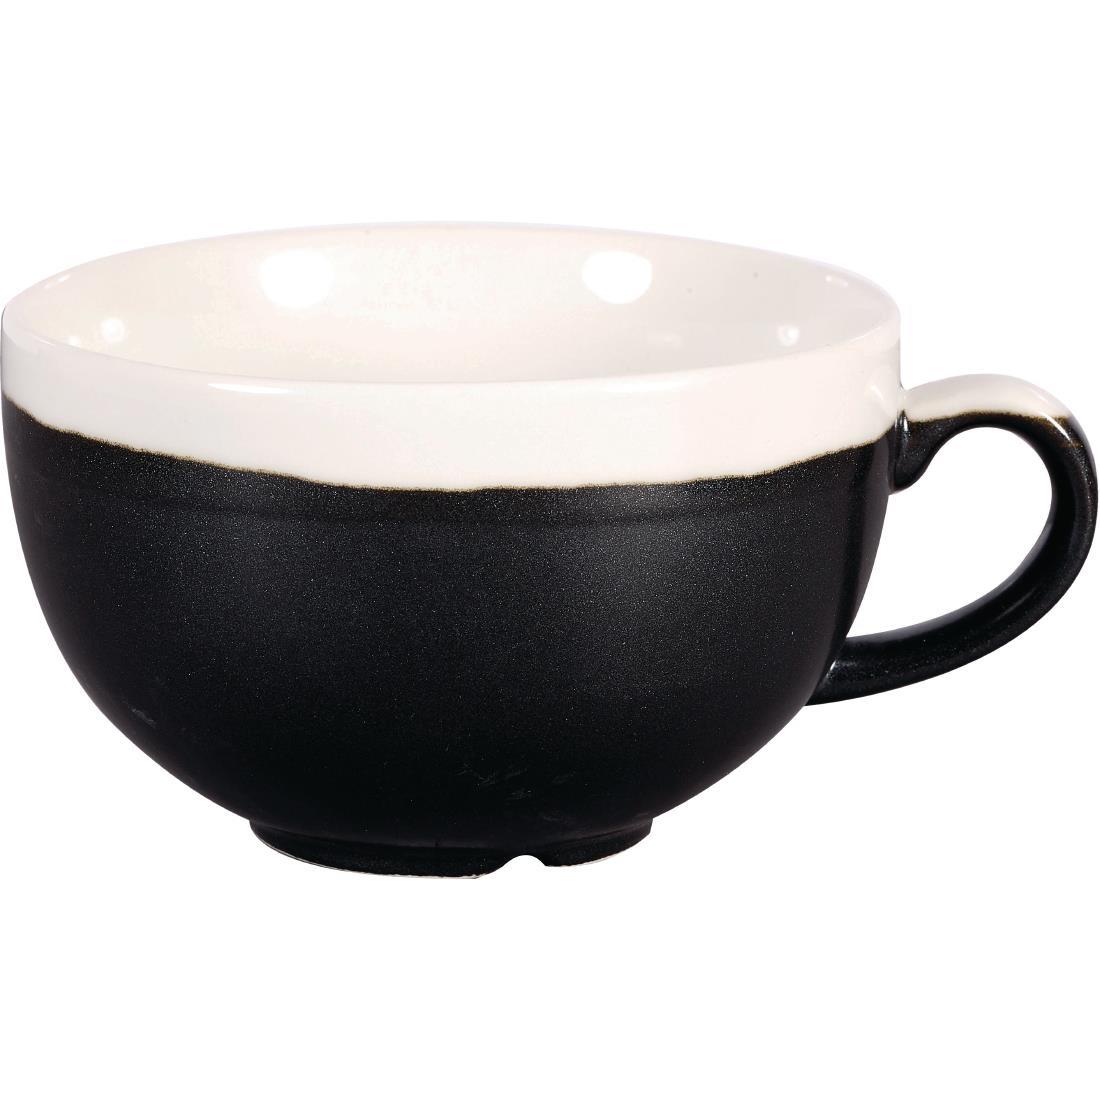 Churchill Monochrome Cappuccino Cup Onyx Black 225ml (Pack of 12) - DR685  - 1